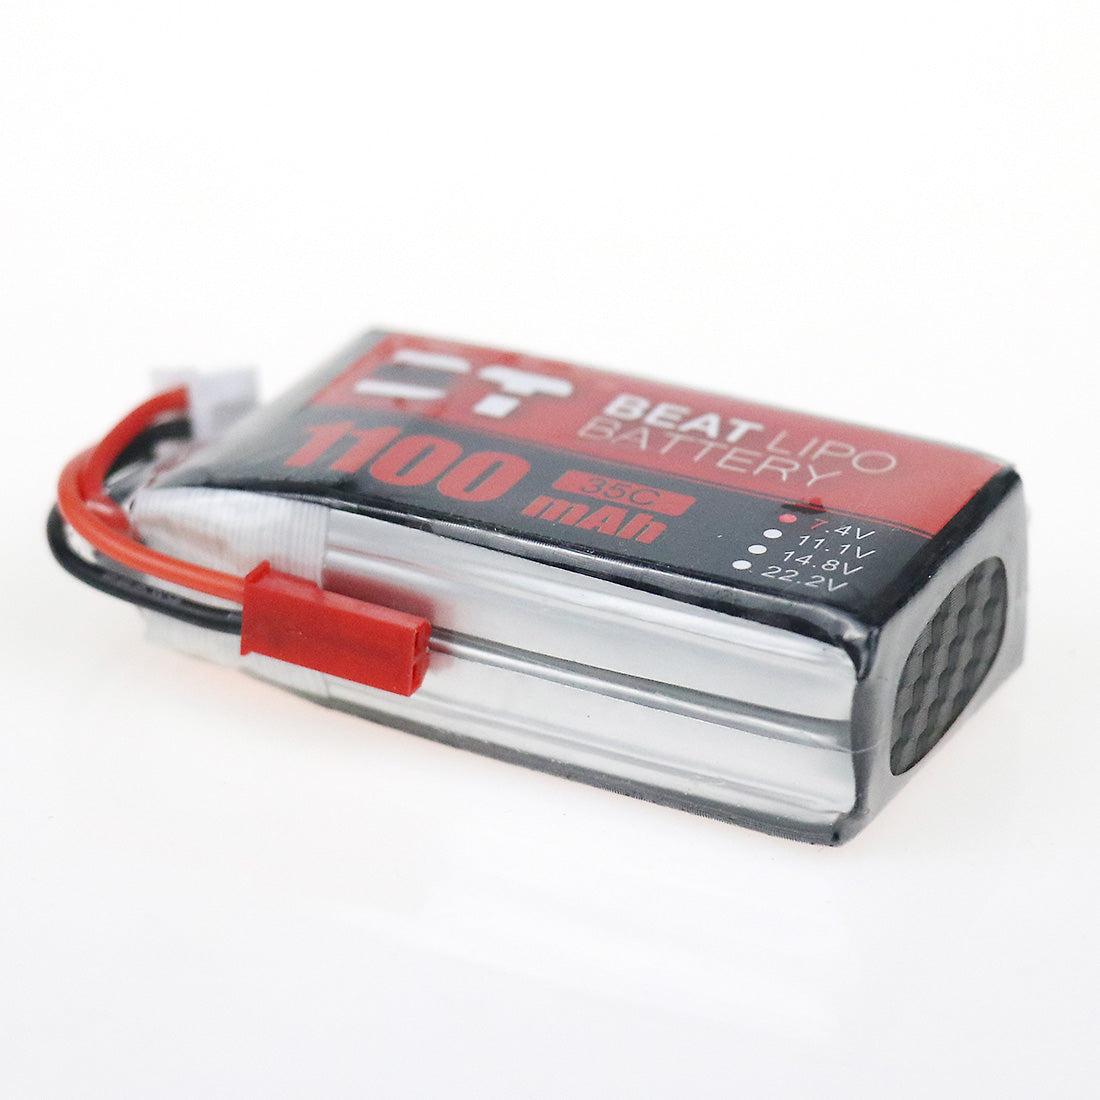 Rosy Brown BT BEAT 7.4V 1100mAh 35C 2S Lipo Battery JST Plug for Wltoys A979 RC Car Hubsan H109S RC Racing Drone